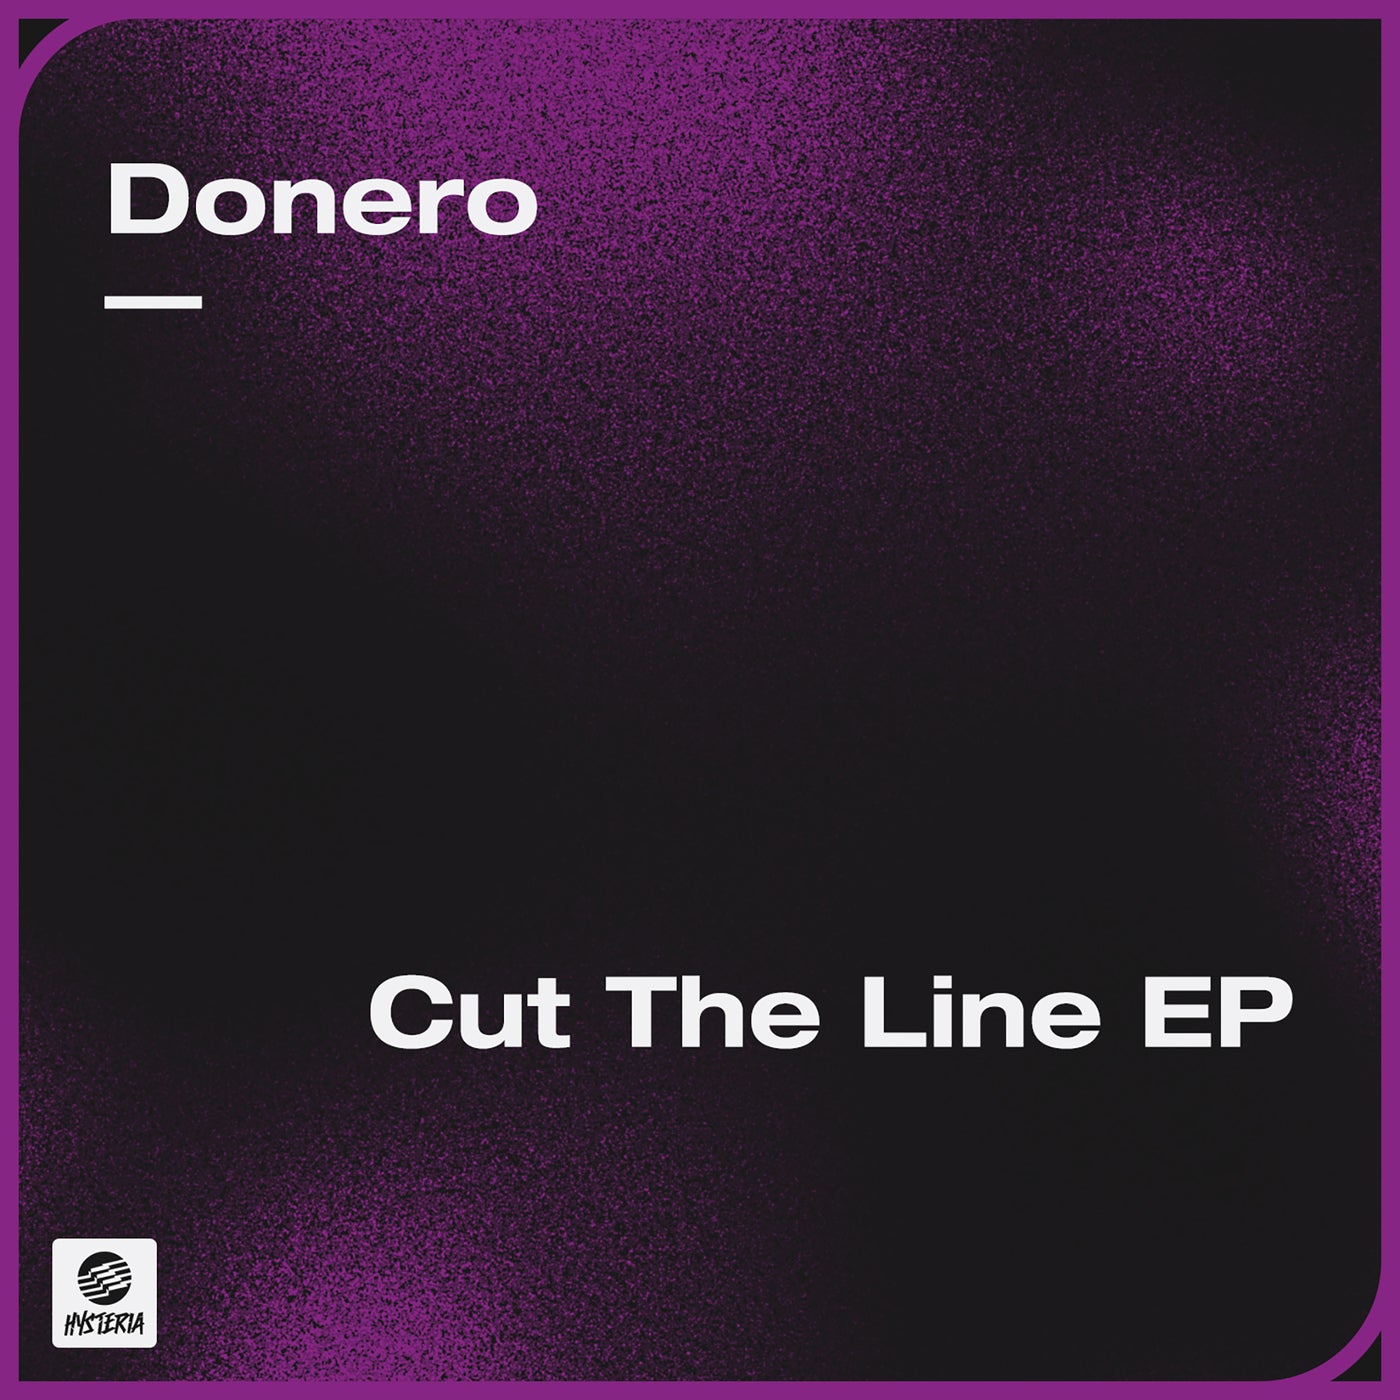 Bass extended mix. Donero. Hysteria records 2021.